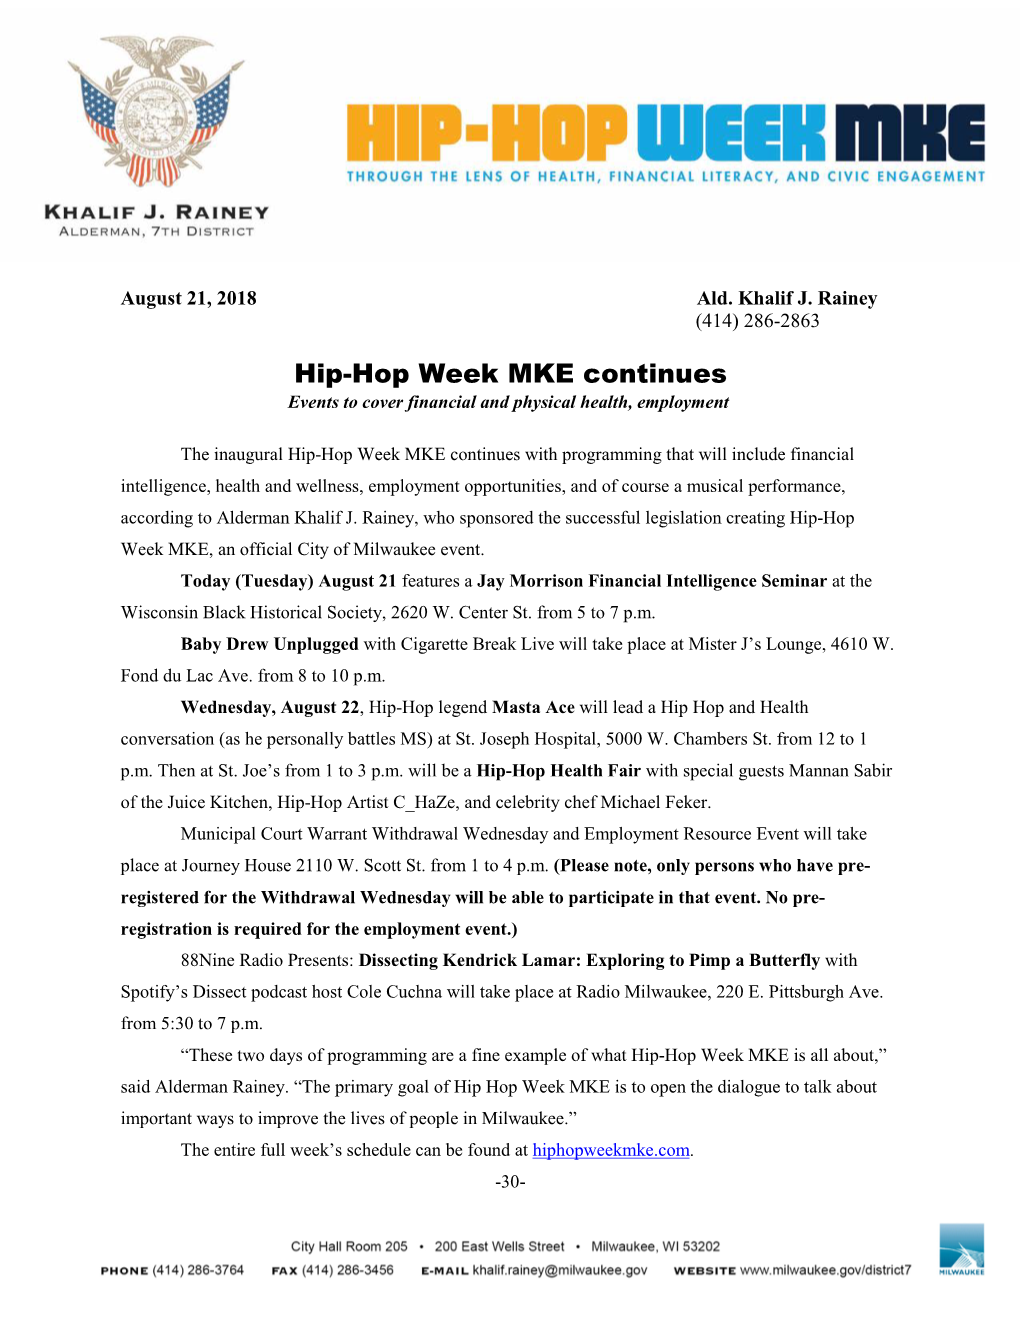 Hip-Hop Week MKE Continues Events to Cover Financial and Physical Health, Employment